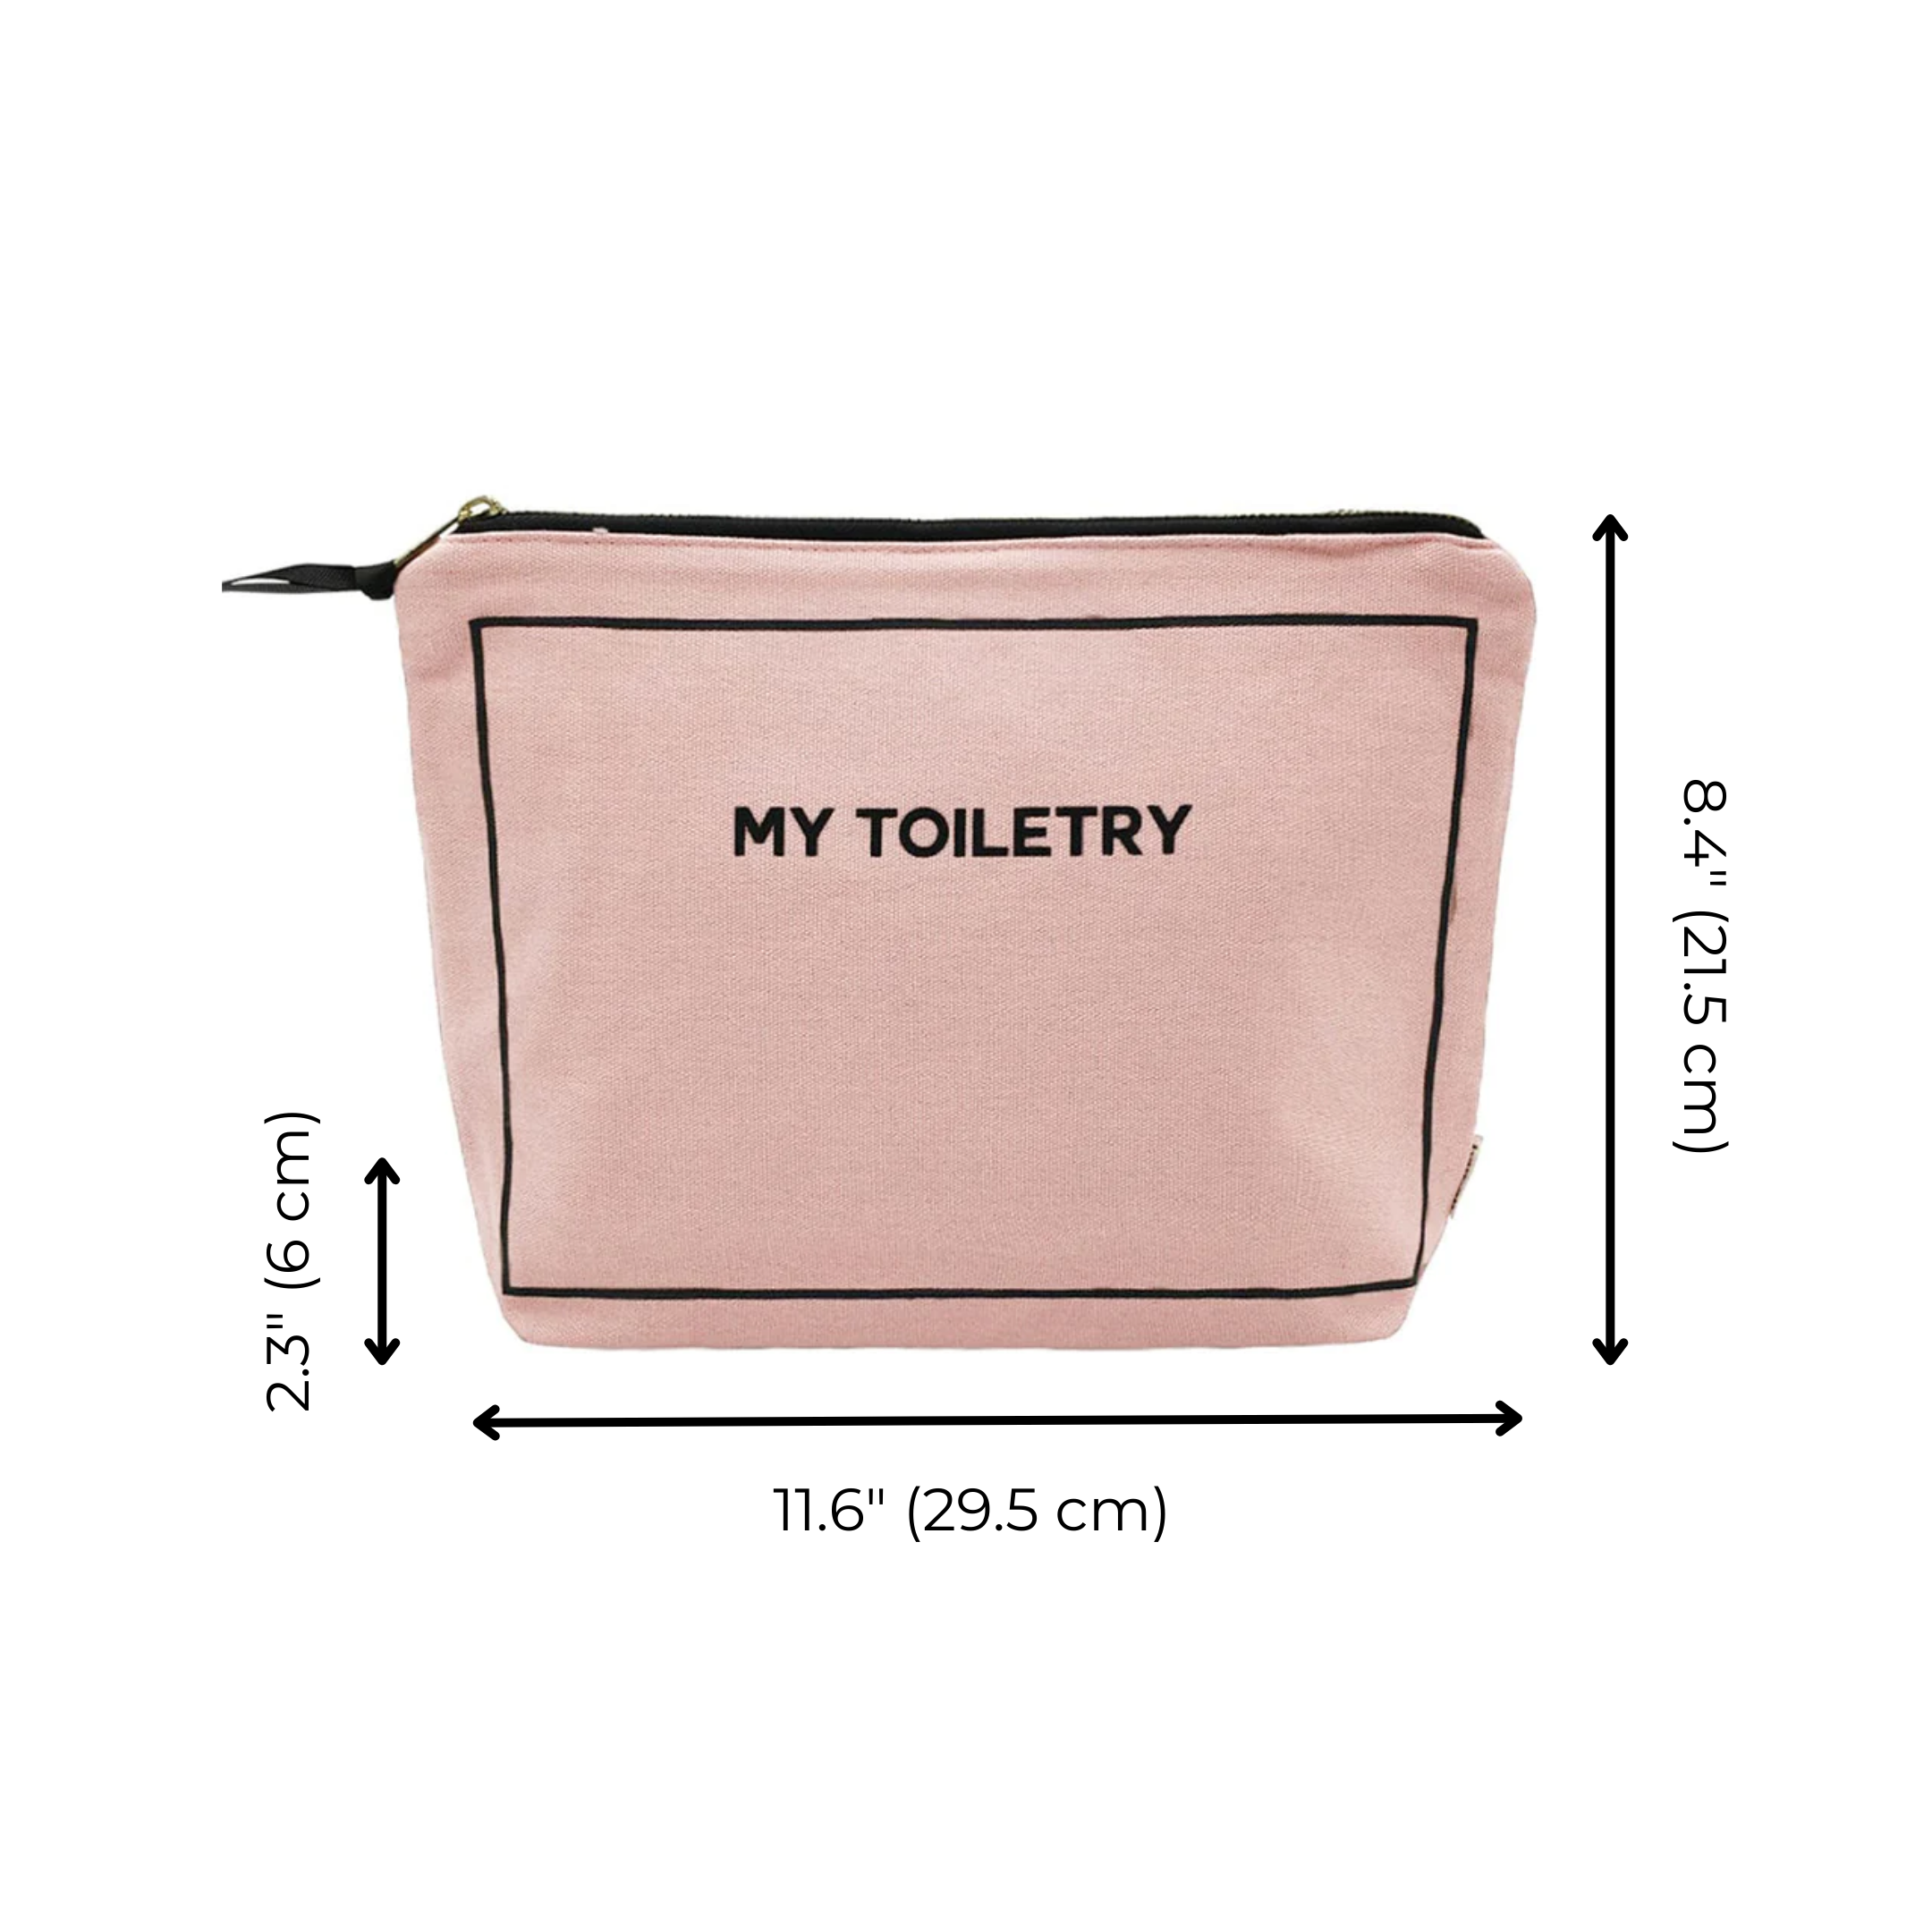 Toiletry Pouch with Coated Lining, Pink/Blush | Bag-all